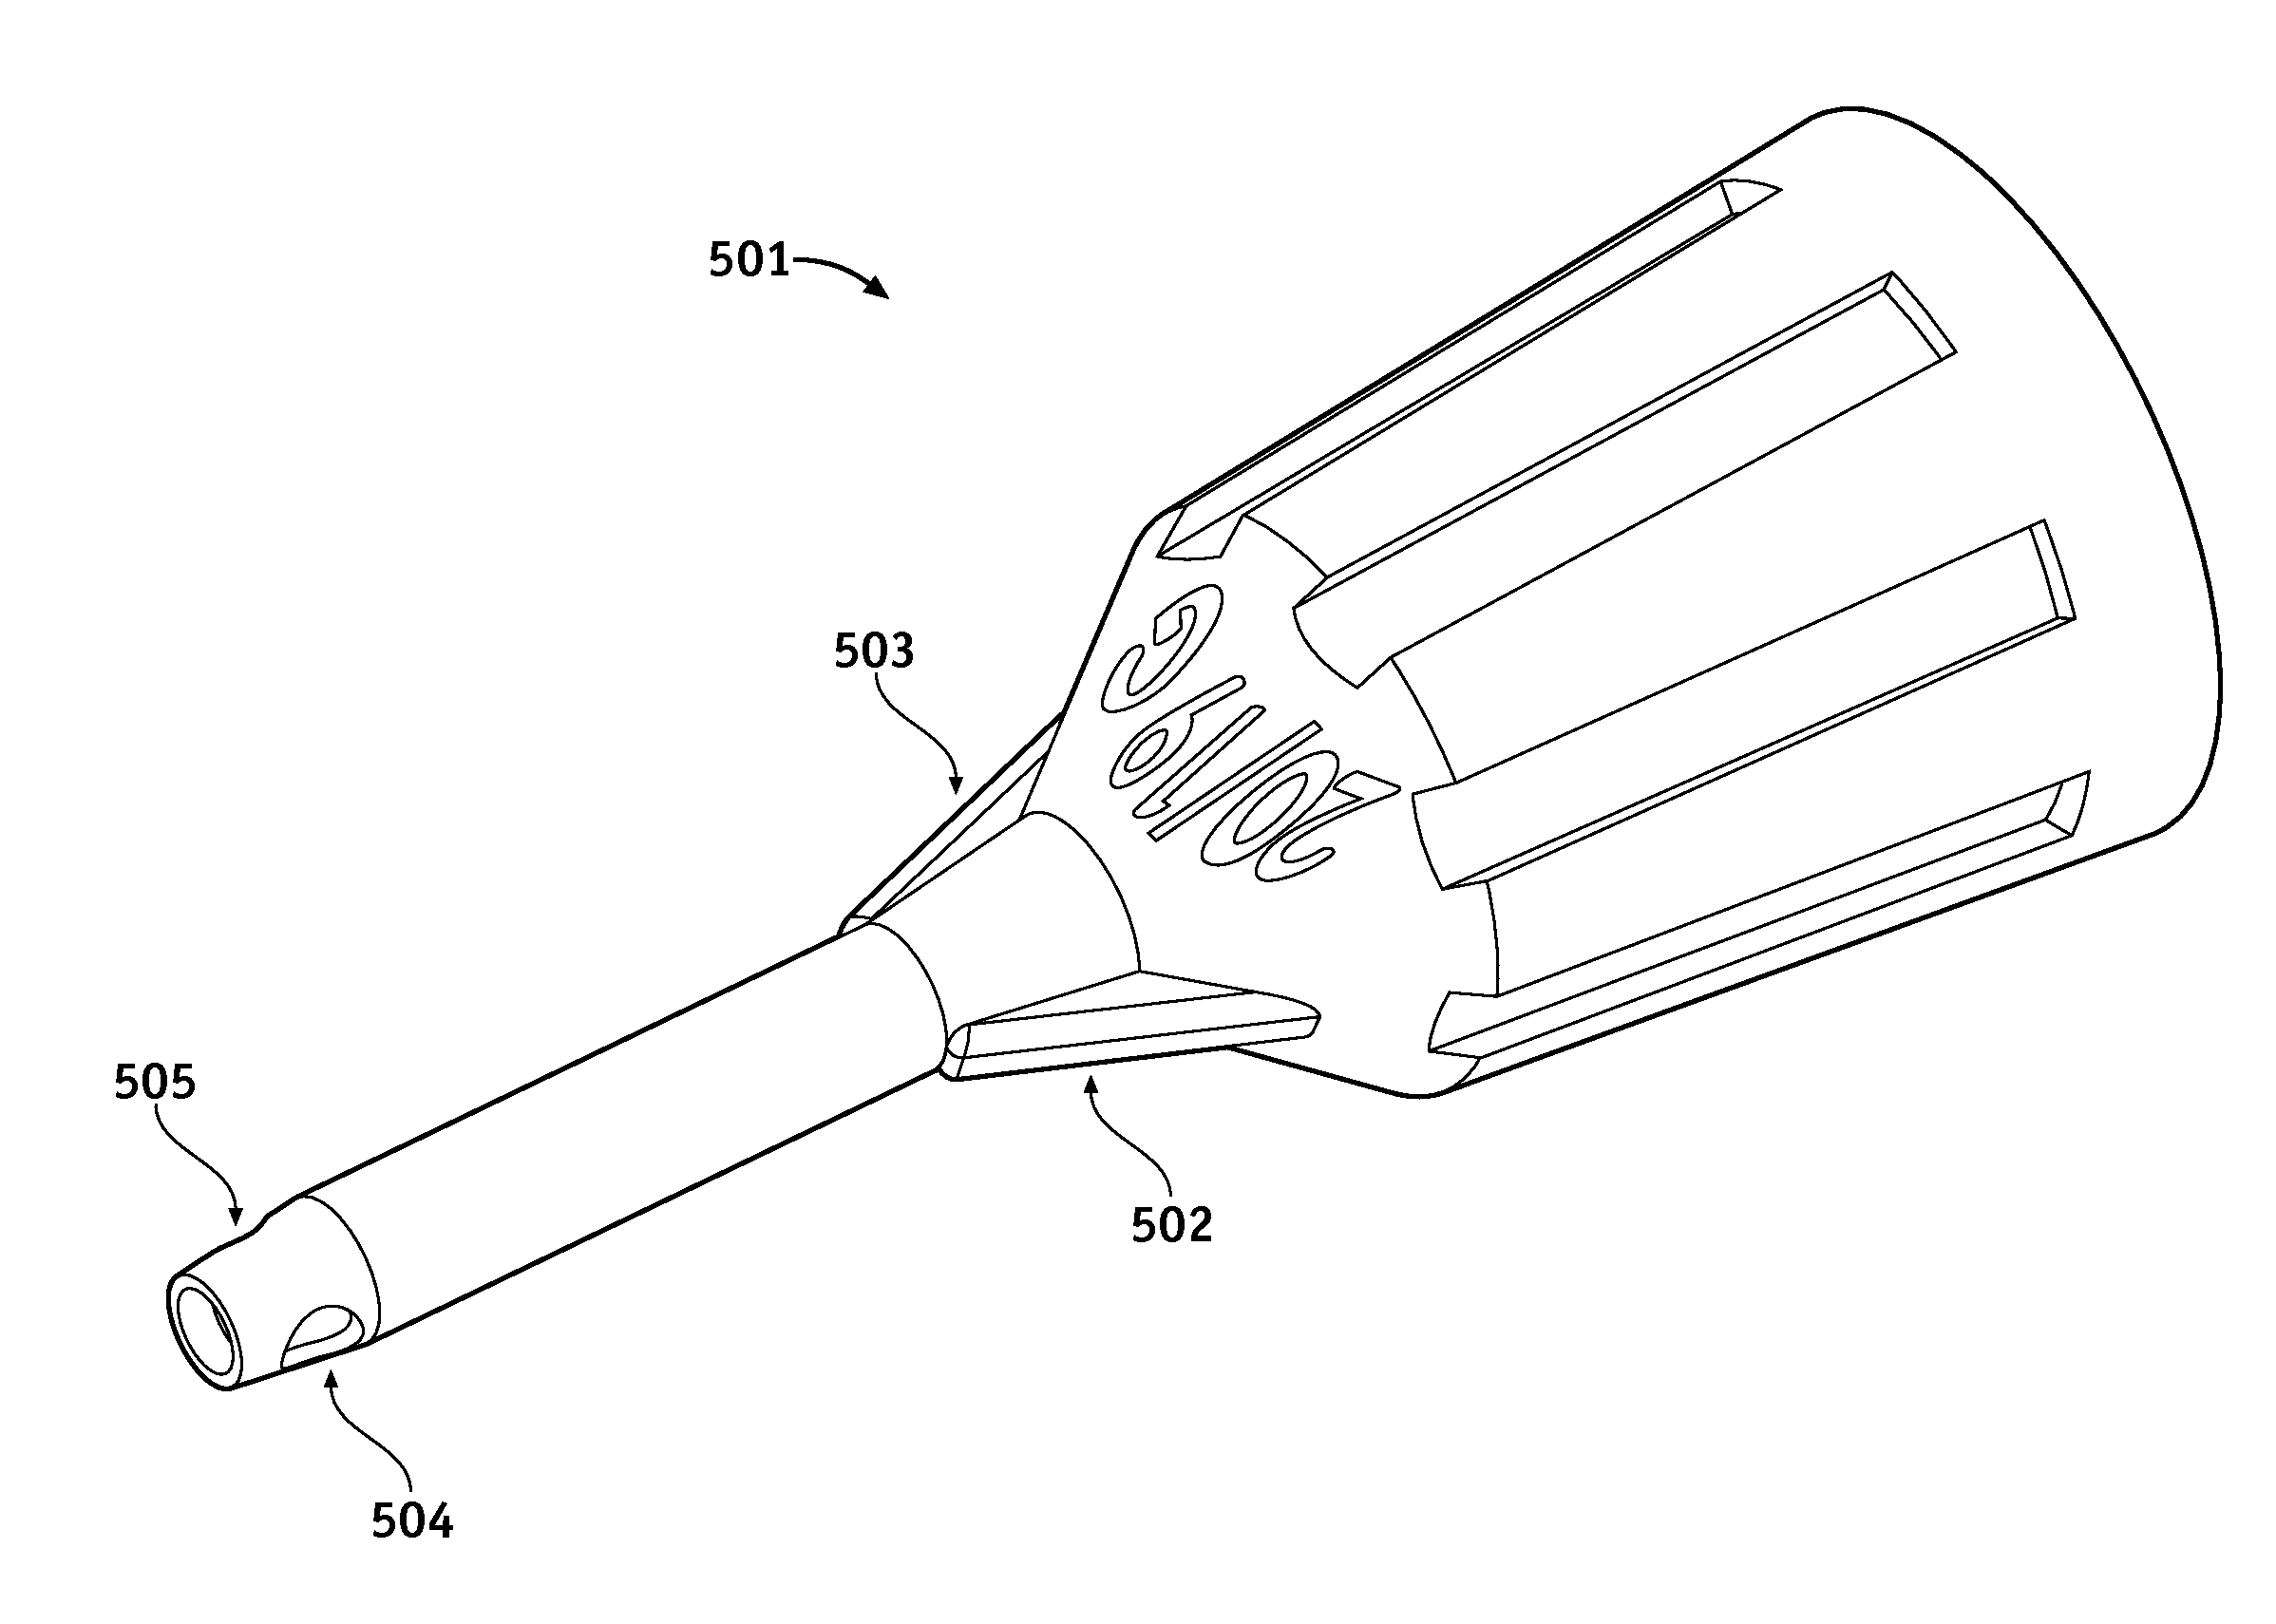 Rotational alignment of fluid delivery device